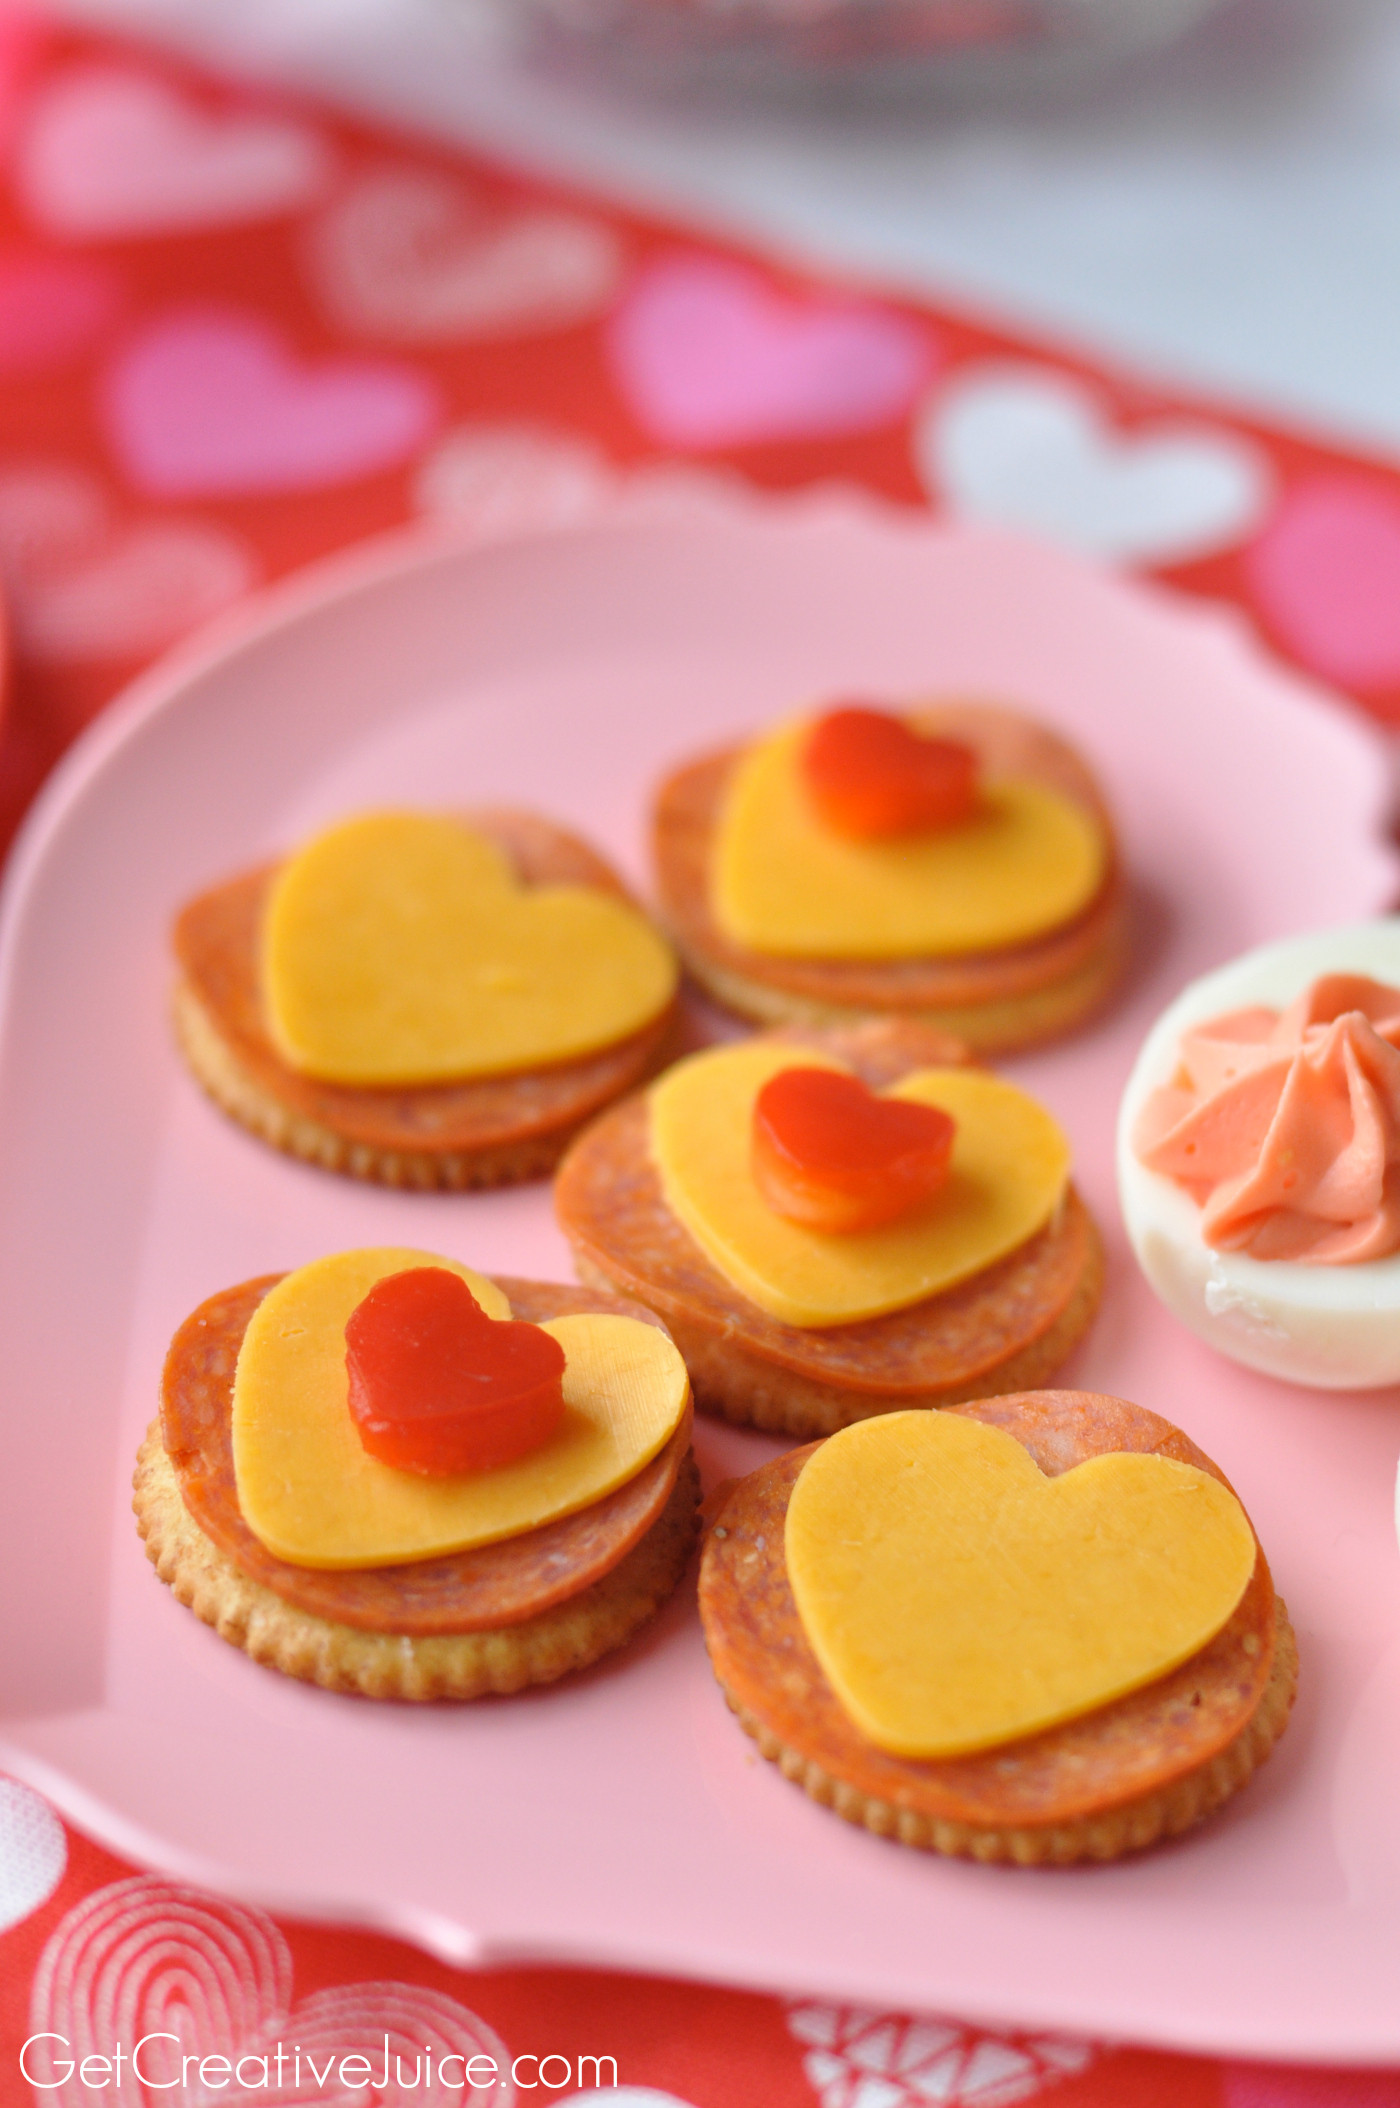 Valentines Day Snack Ideas
 Valentine Lunch Ideas and Snack Ideas